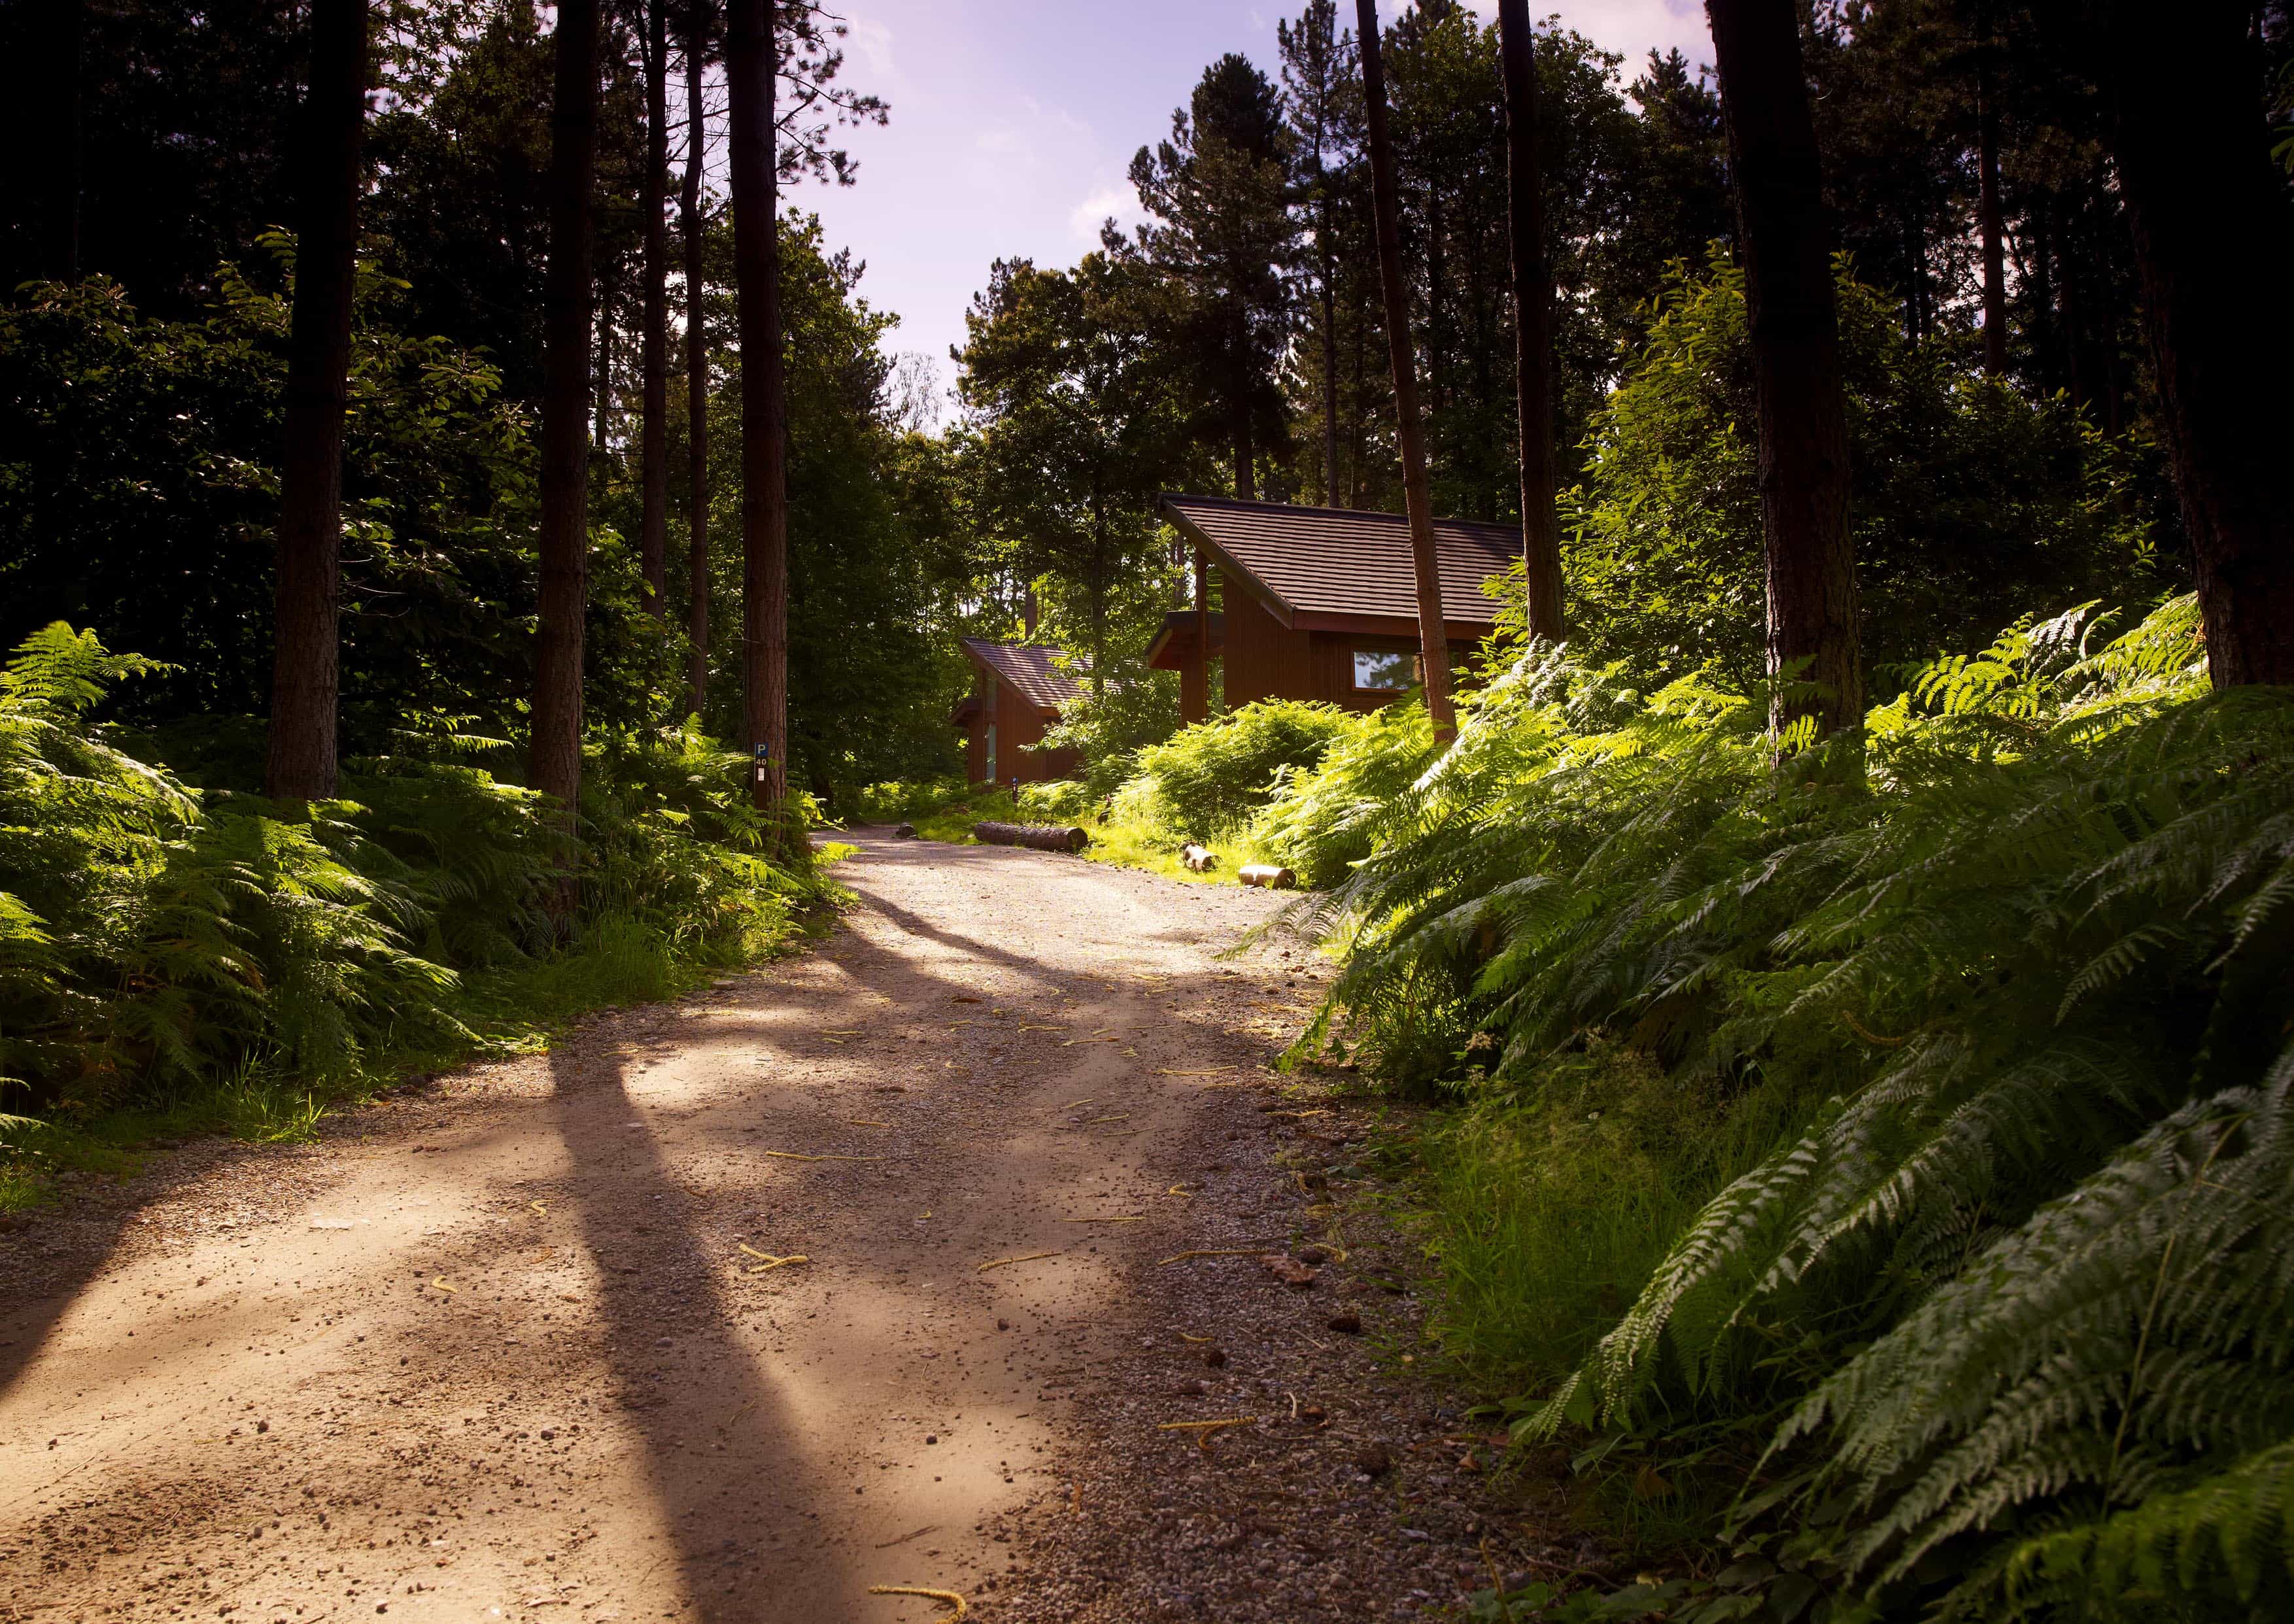 Walks and trails at Glentress Forest, Peebles